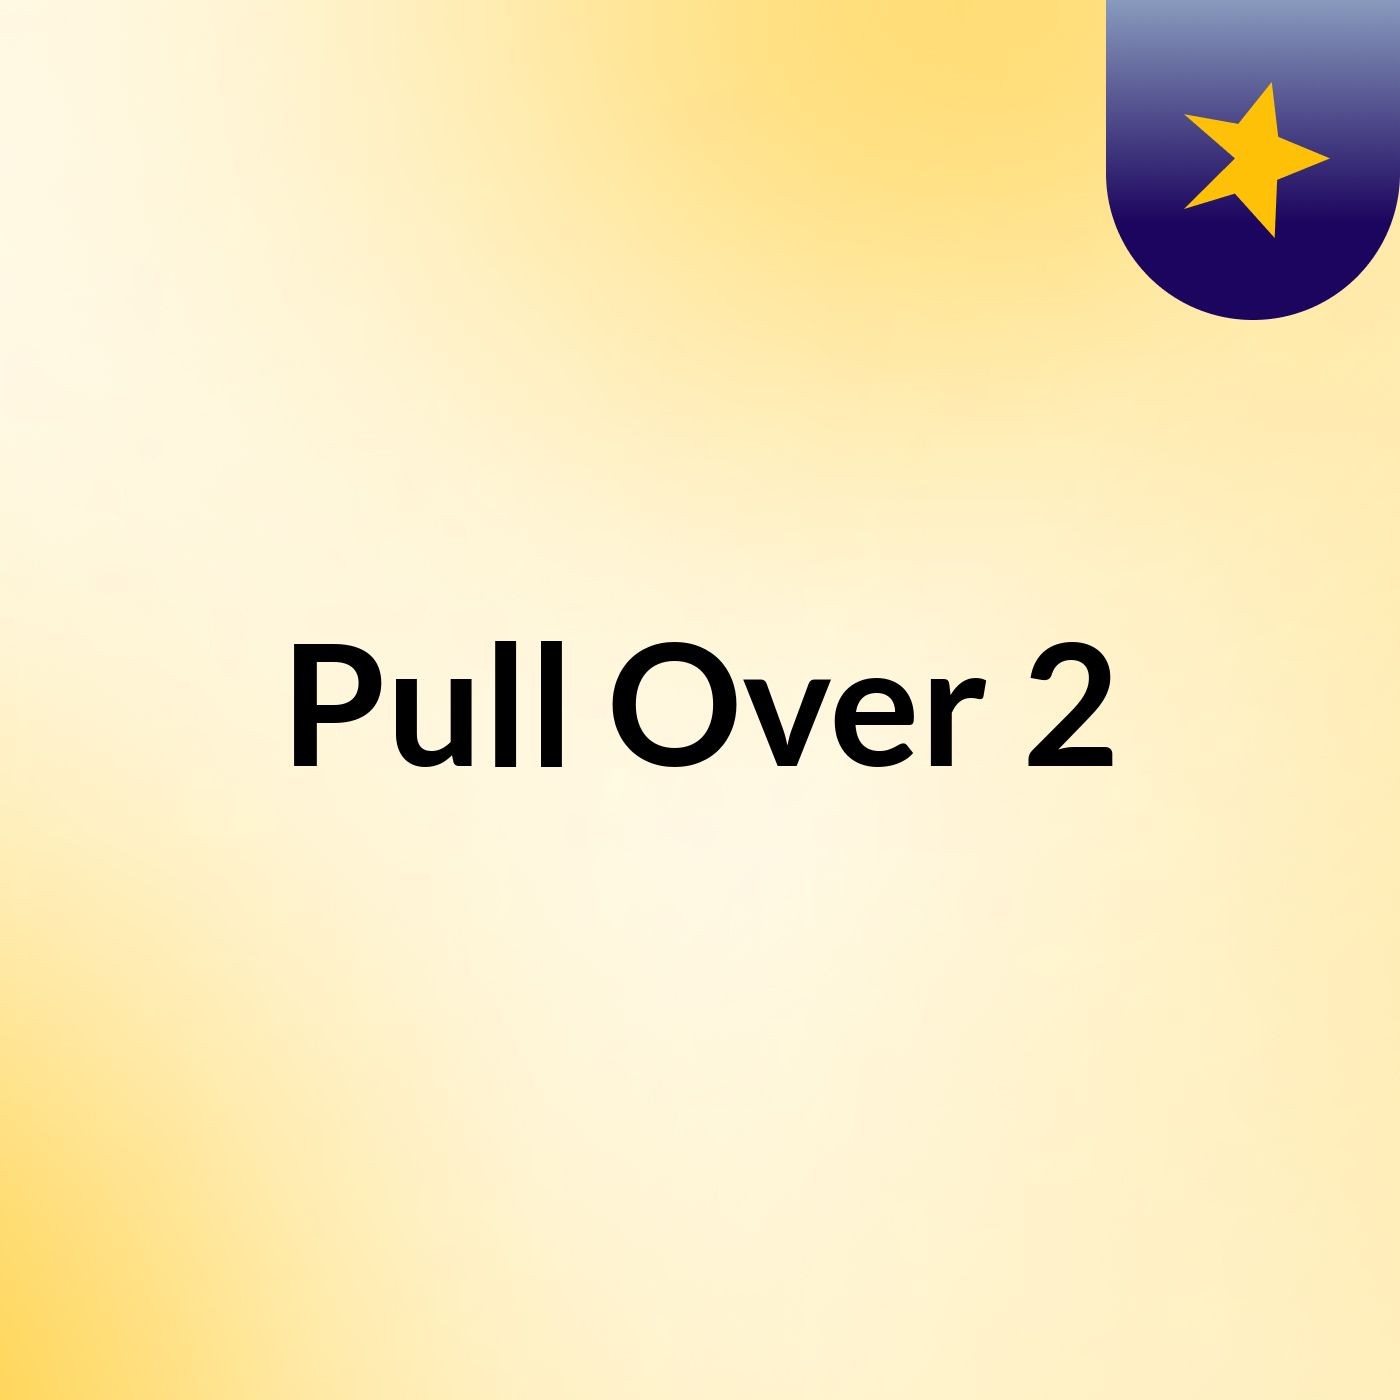 Pull Over 2